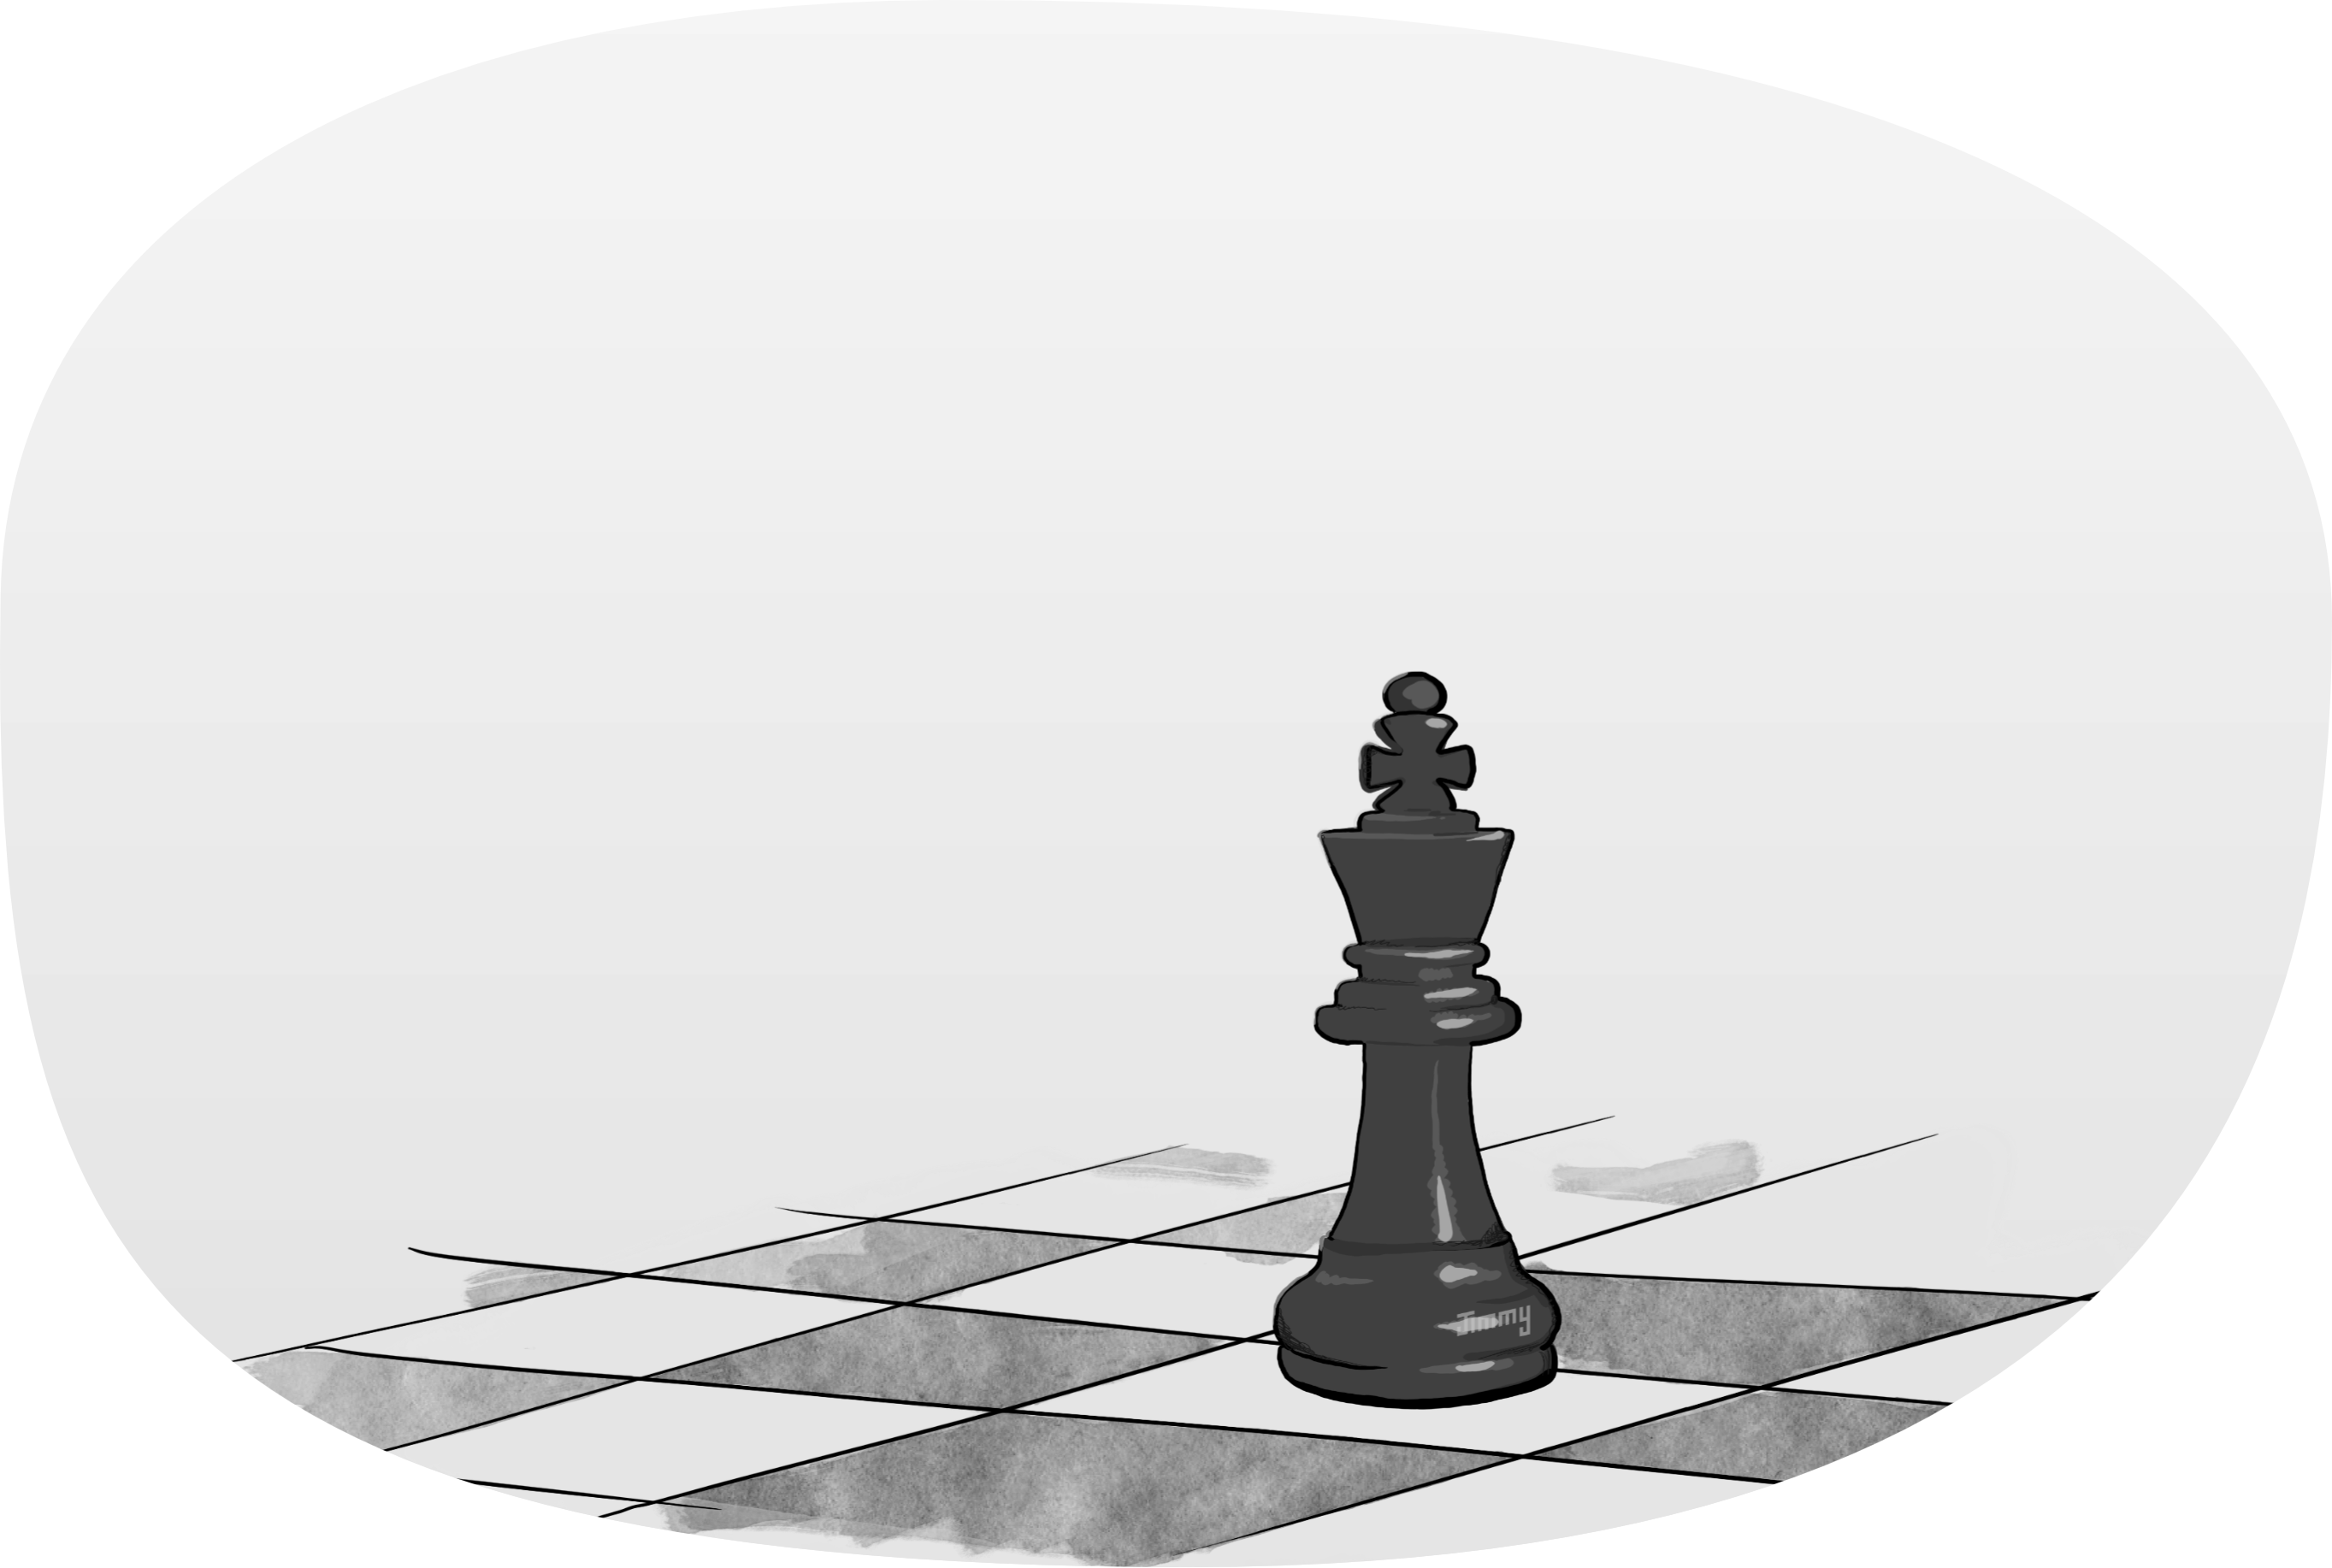 Illustration of a chess piece on chess board